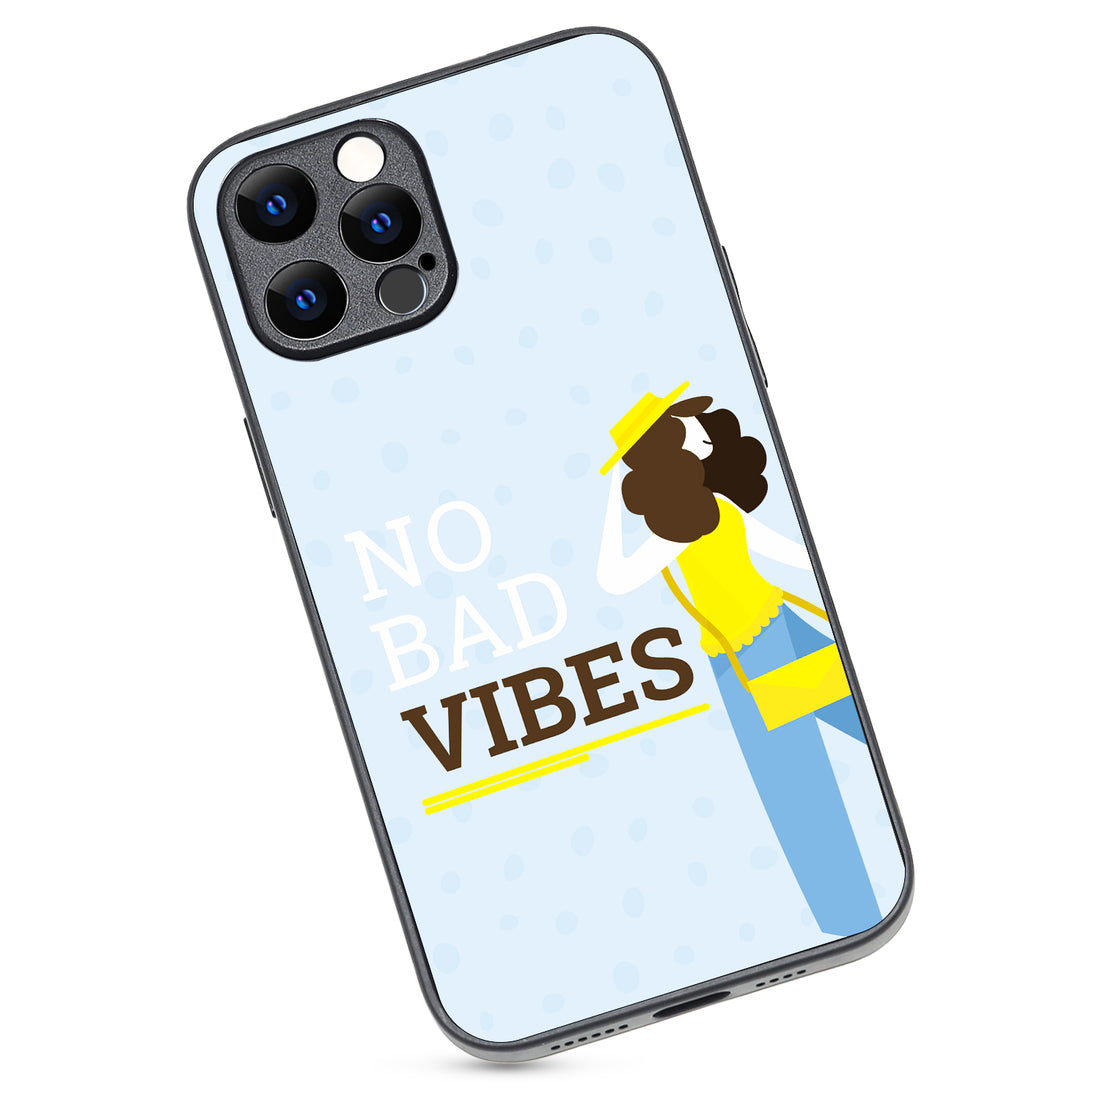 No Bad Vibes Motivational Quotes iPhone 12 Pro Max Case